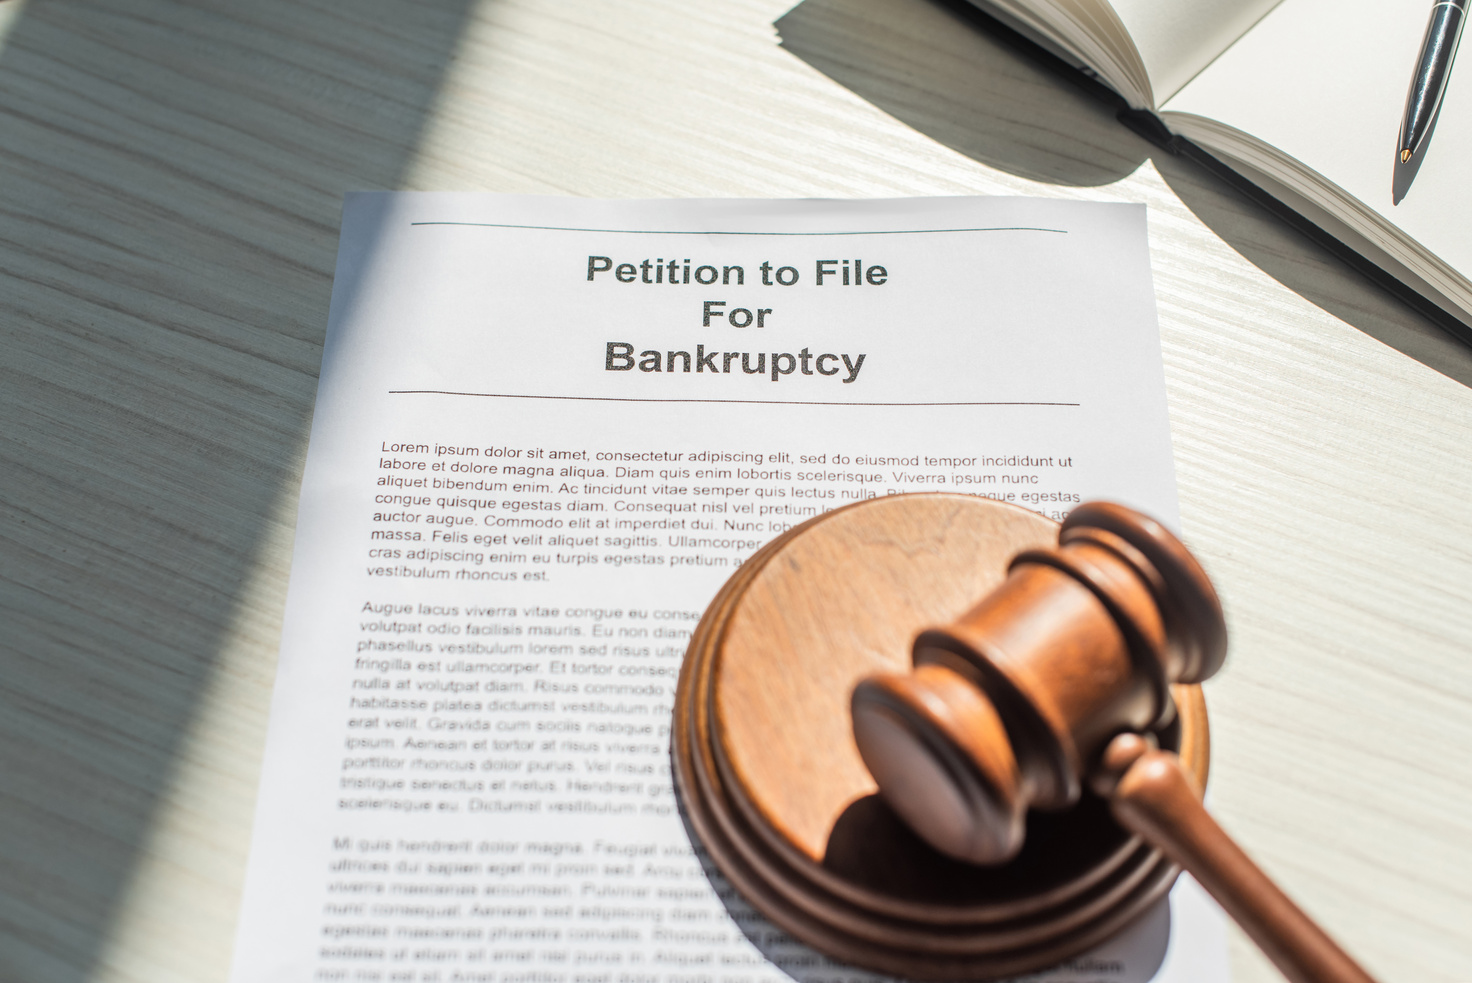 Gavel Wooden Block Petition Bankruptcy